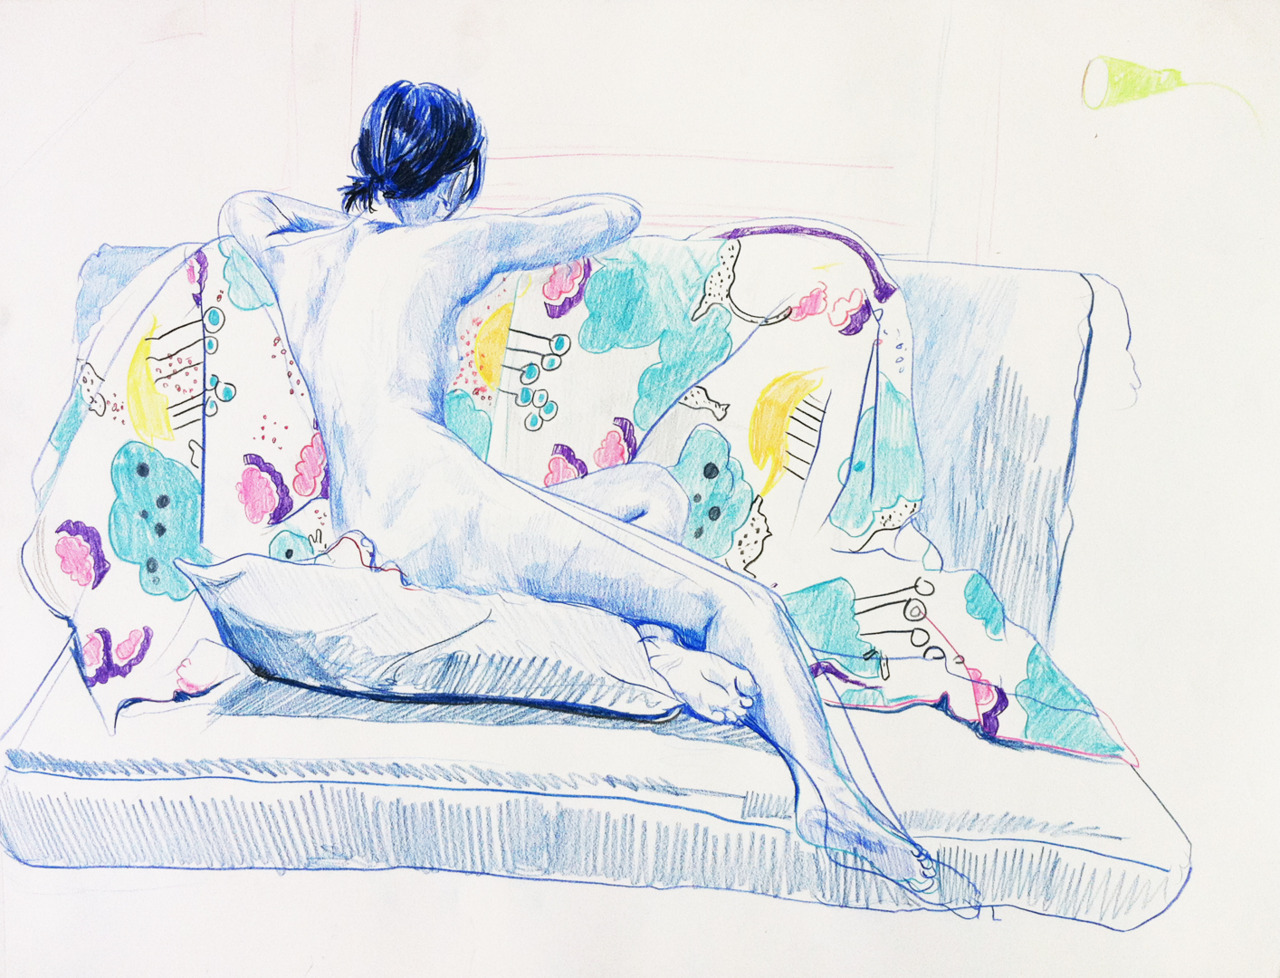 koalaporpoise: Katy O'Connor,  “Blue Girl on Couch”, colored pencil on paper,